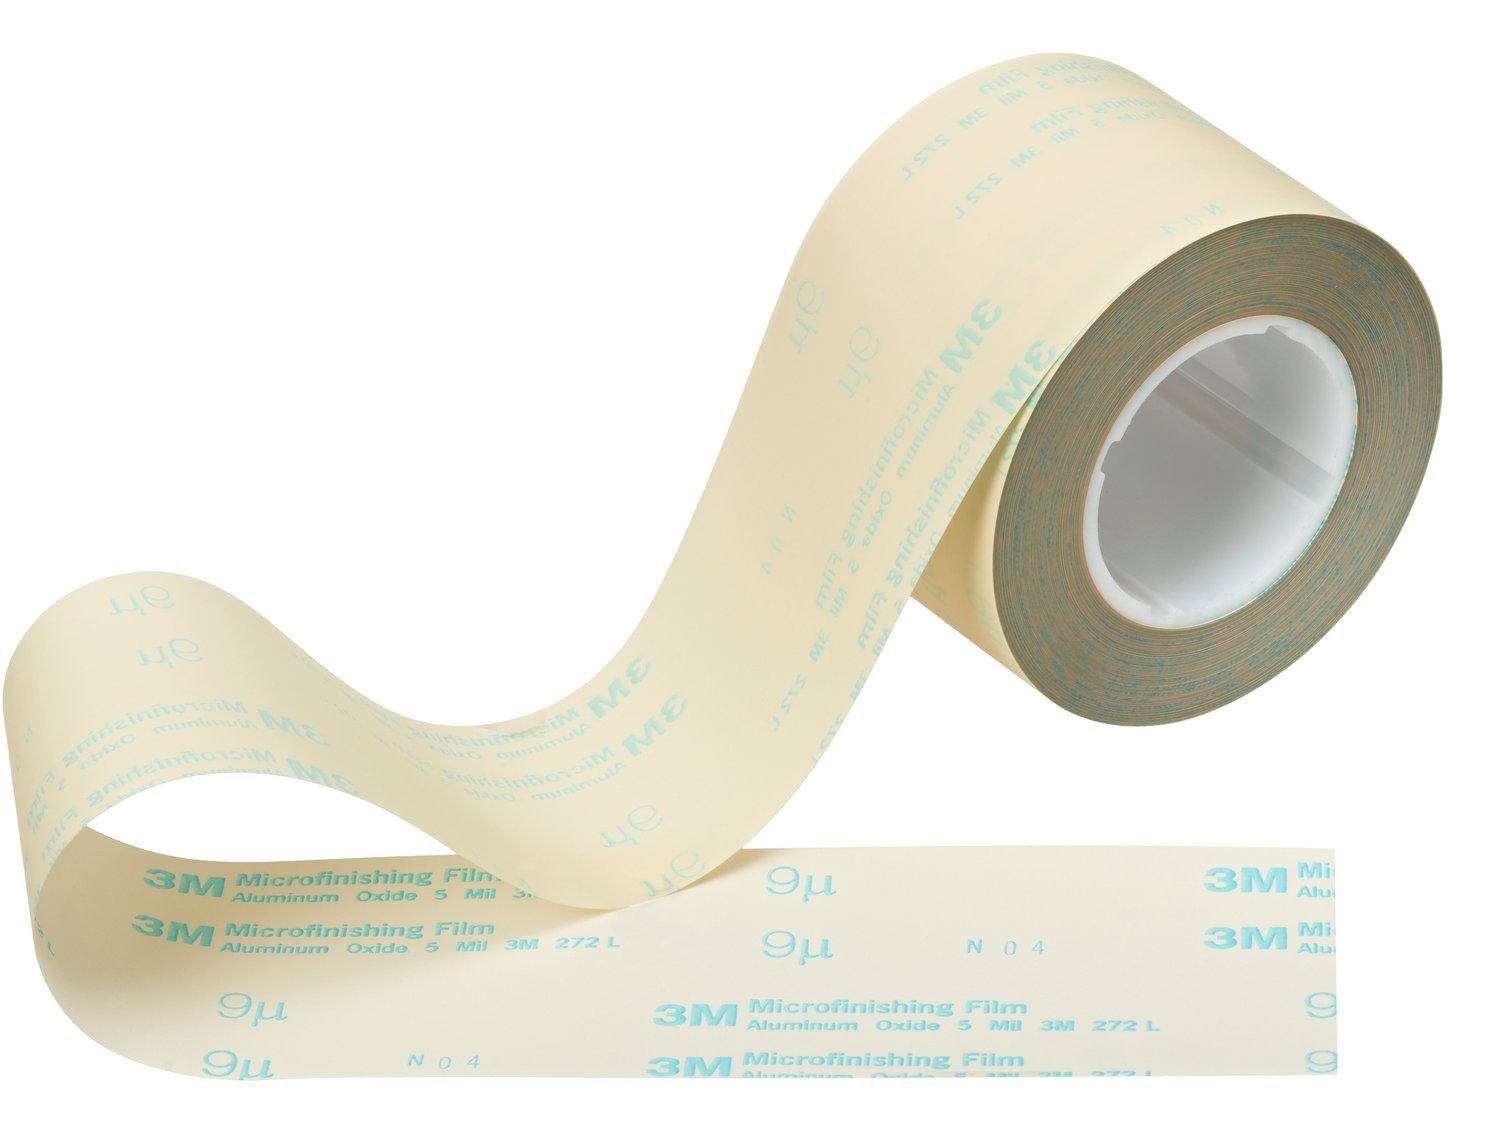 7010533990 - 3M Microfinishing Film Roll 272L, 20 Mic 5MIL, Type UK, 2 in x 150 ft x
3 in (50.8mmx45.75m), Keyed Core, ASO